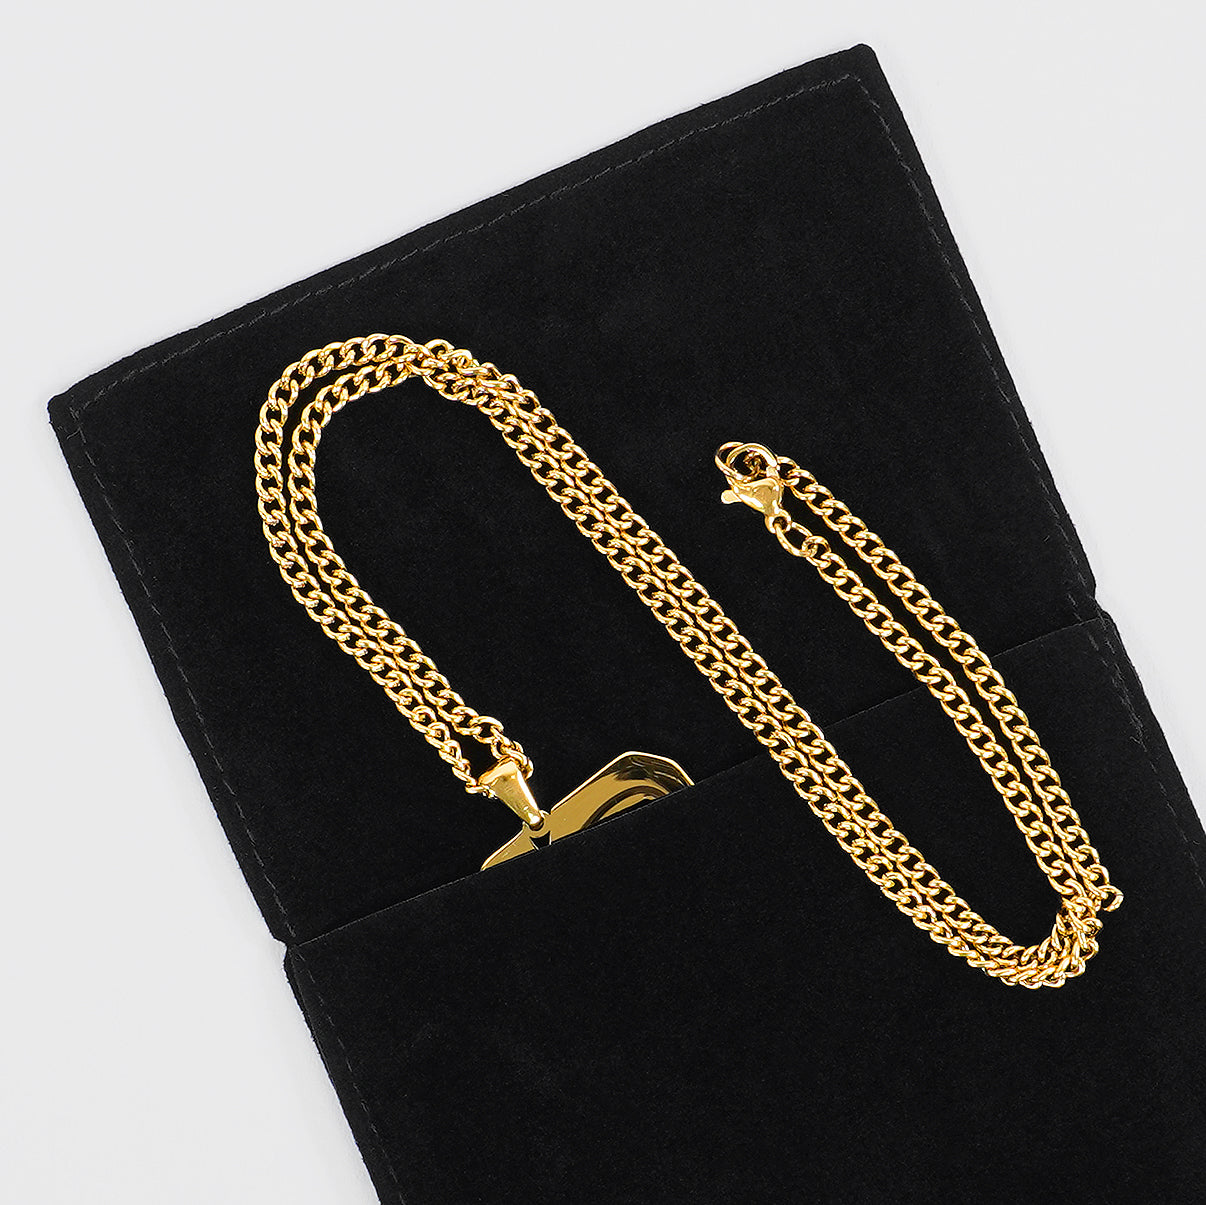 13 Number Pendant with Chain Necklace - Gold Plated Stainless Steel